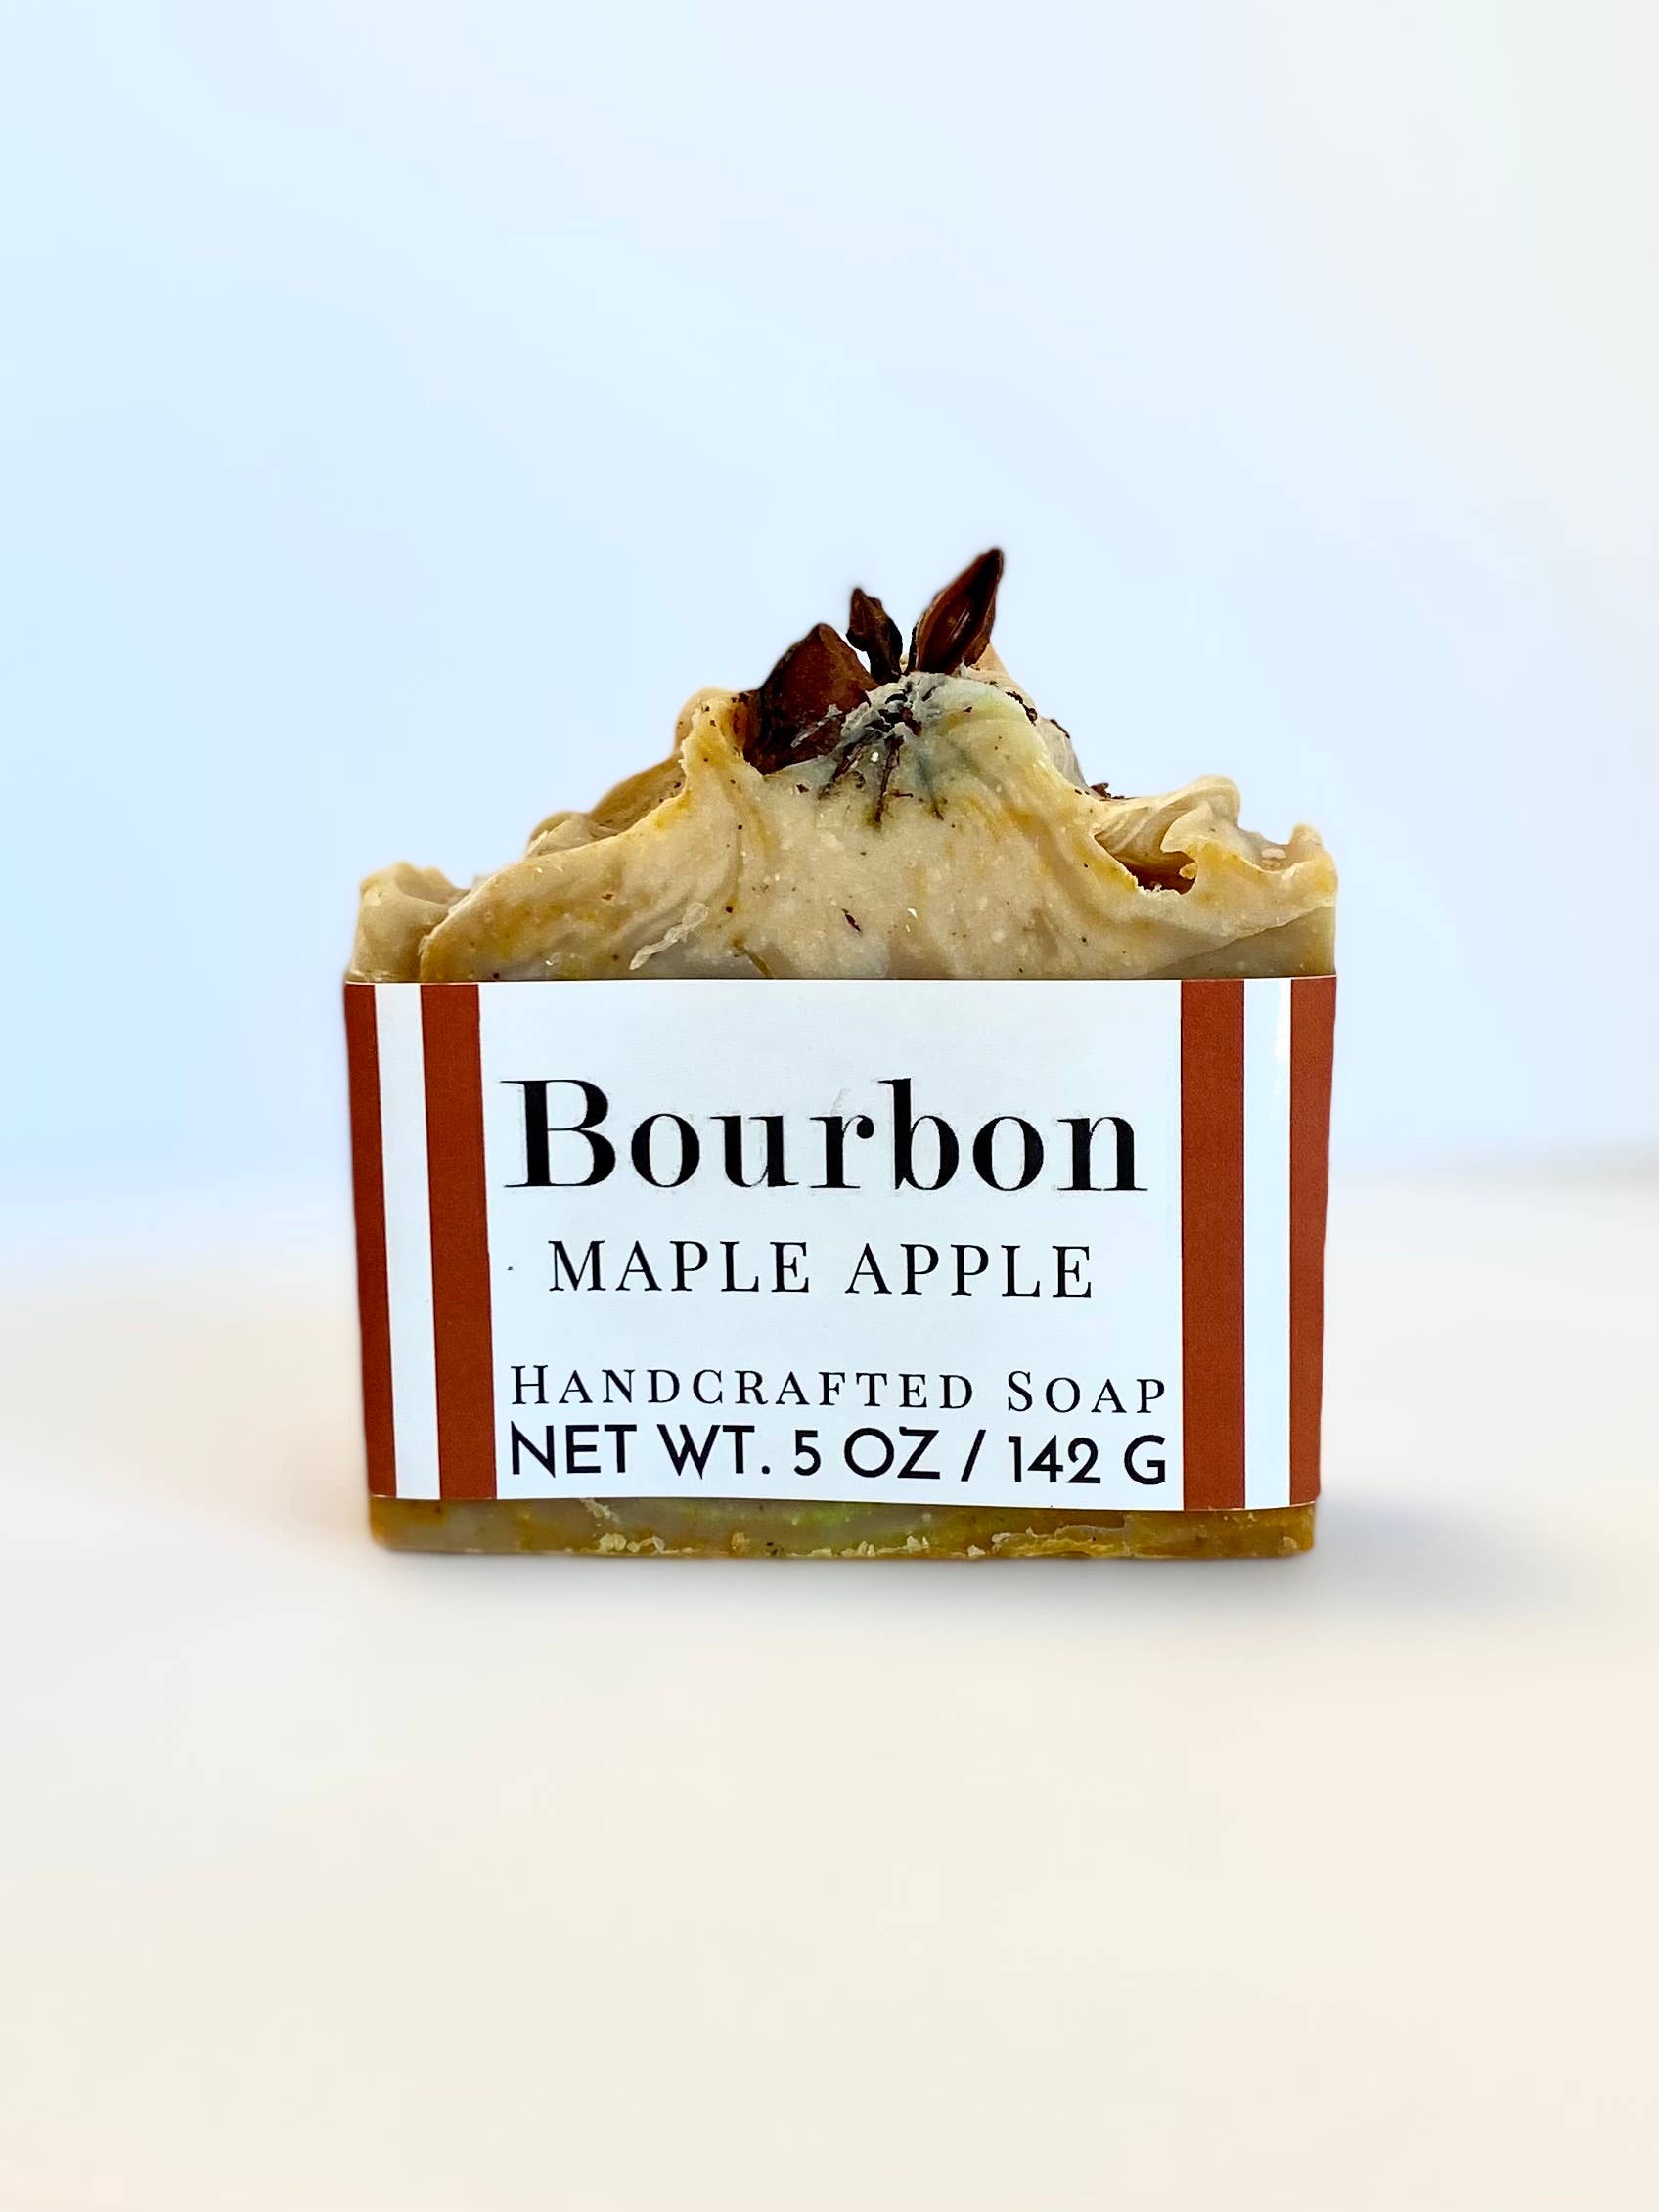 5 oz Bourbon Maple Apple Handcrafted Soap - Pluff Mud Mercantile